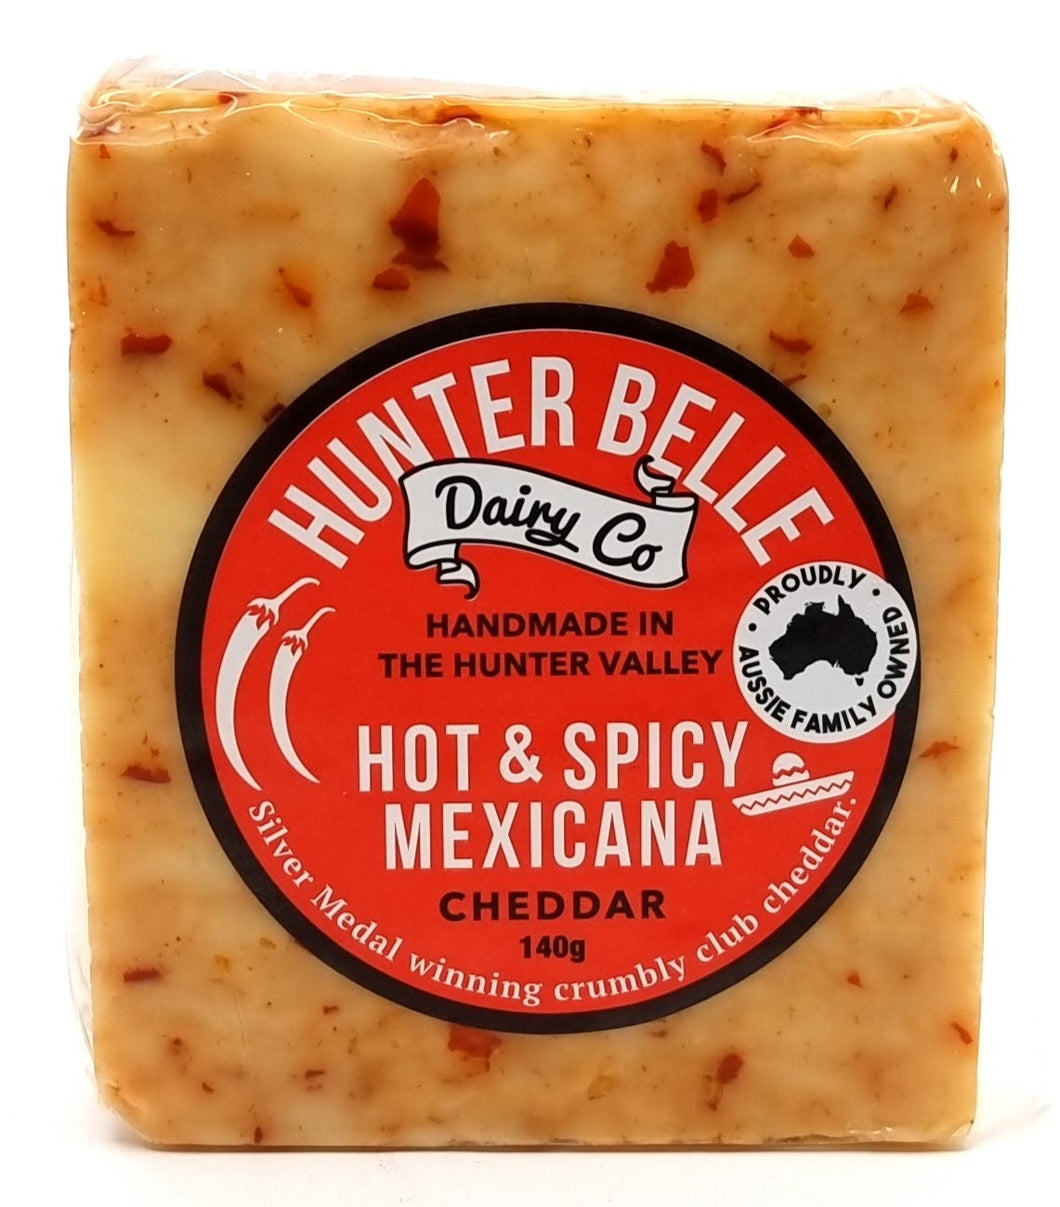 Hunter Belle Hot & Spicy Mexicana Cheddar 140g*